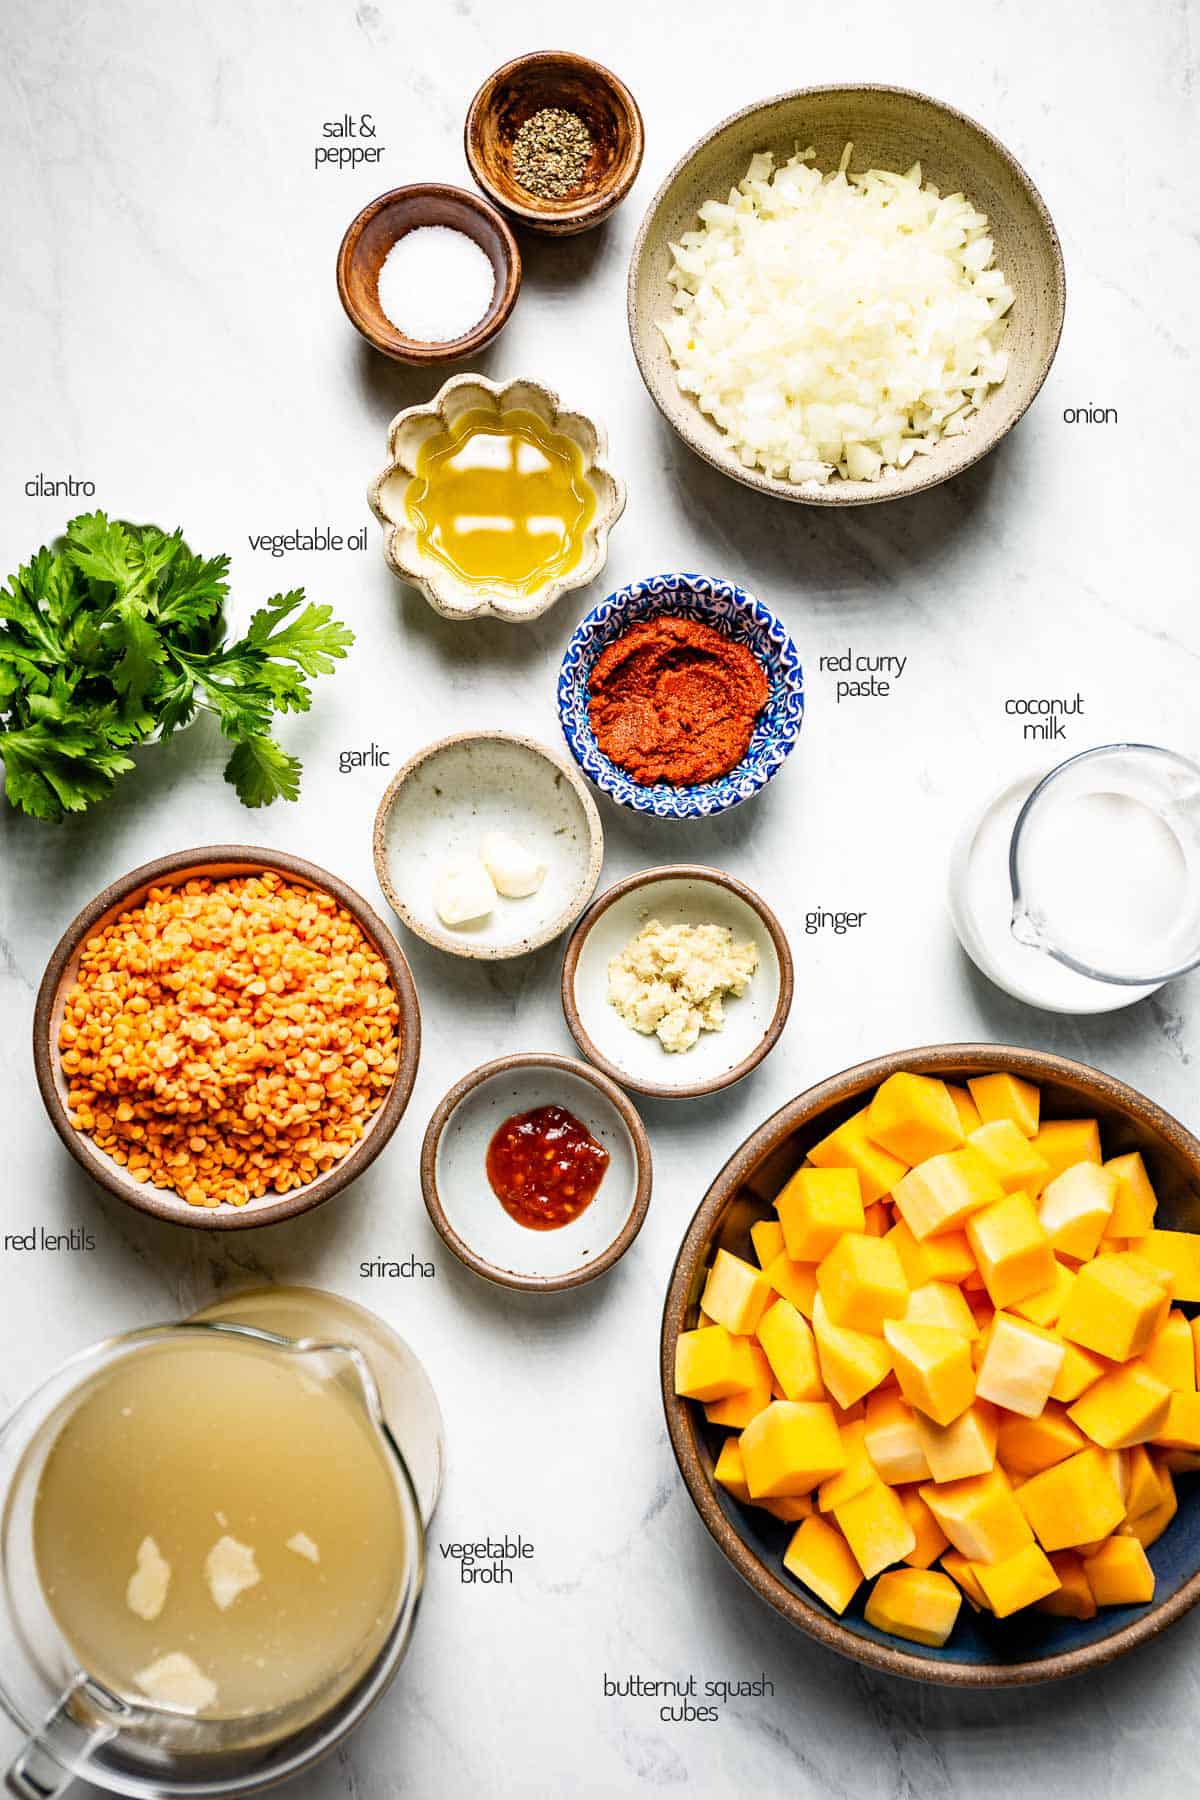 Ingredients are placed in bowls photographed from the top view